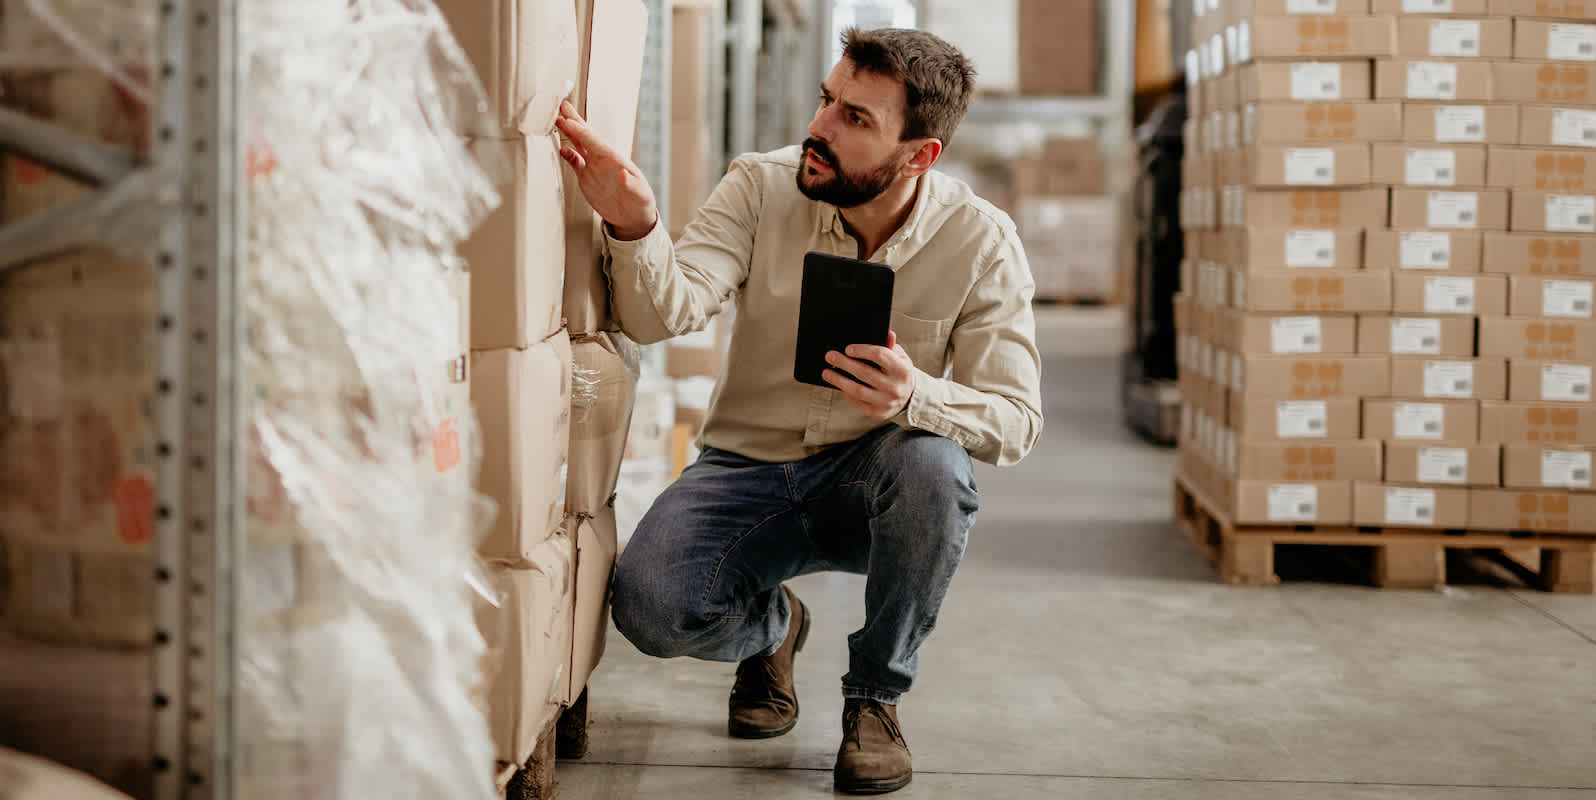 Man inspects a pallet of goods in a warehouse